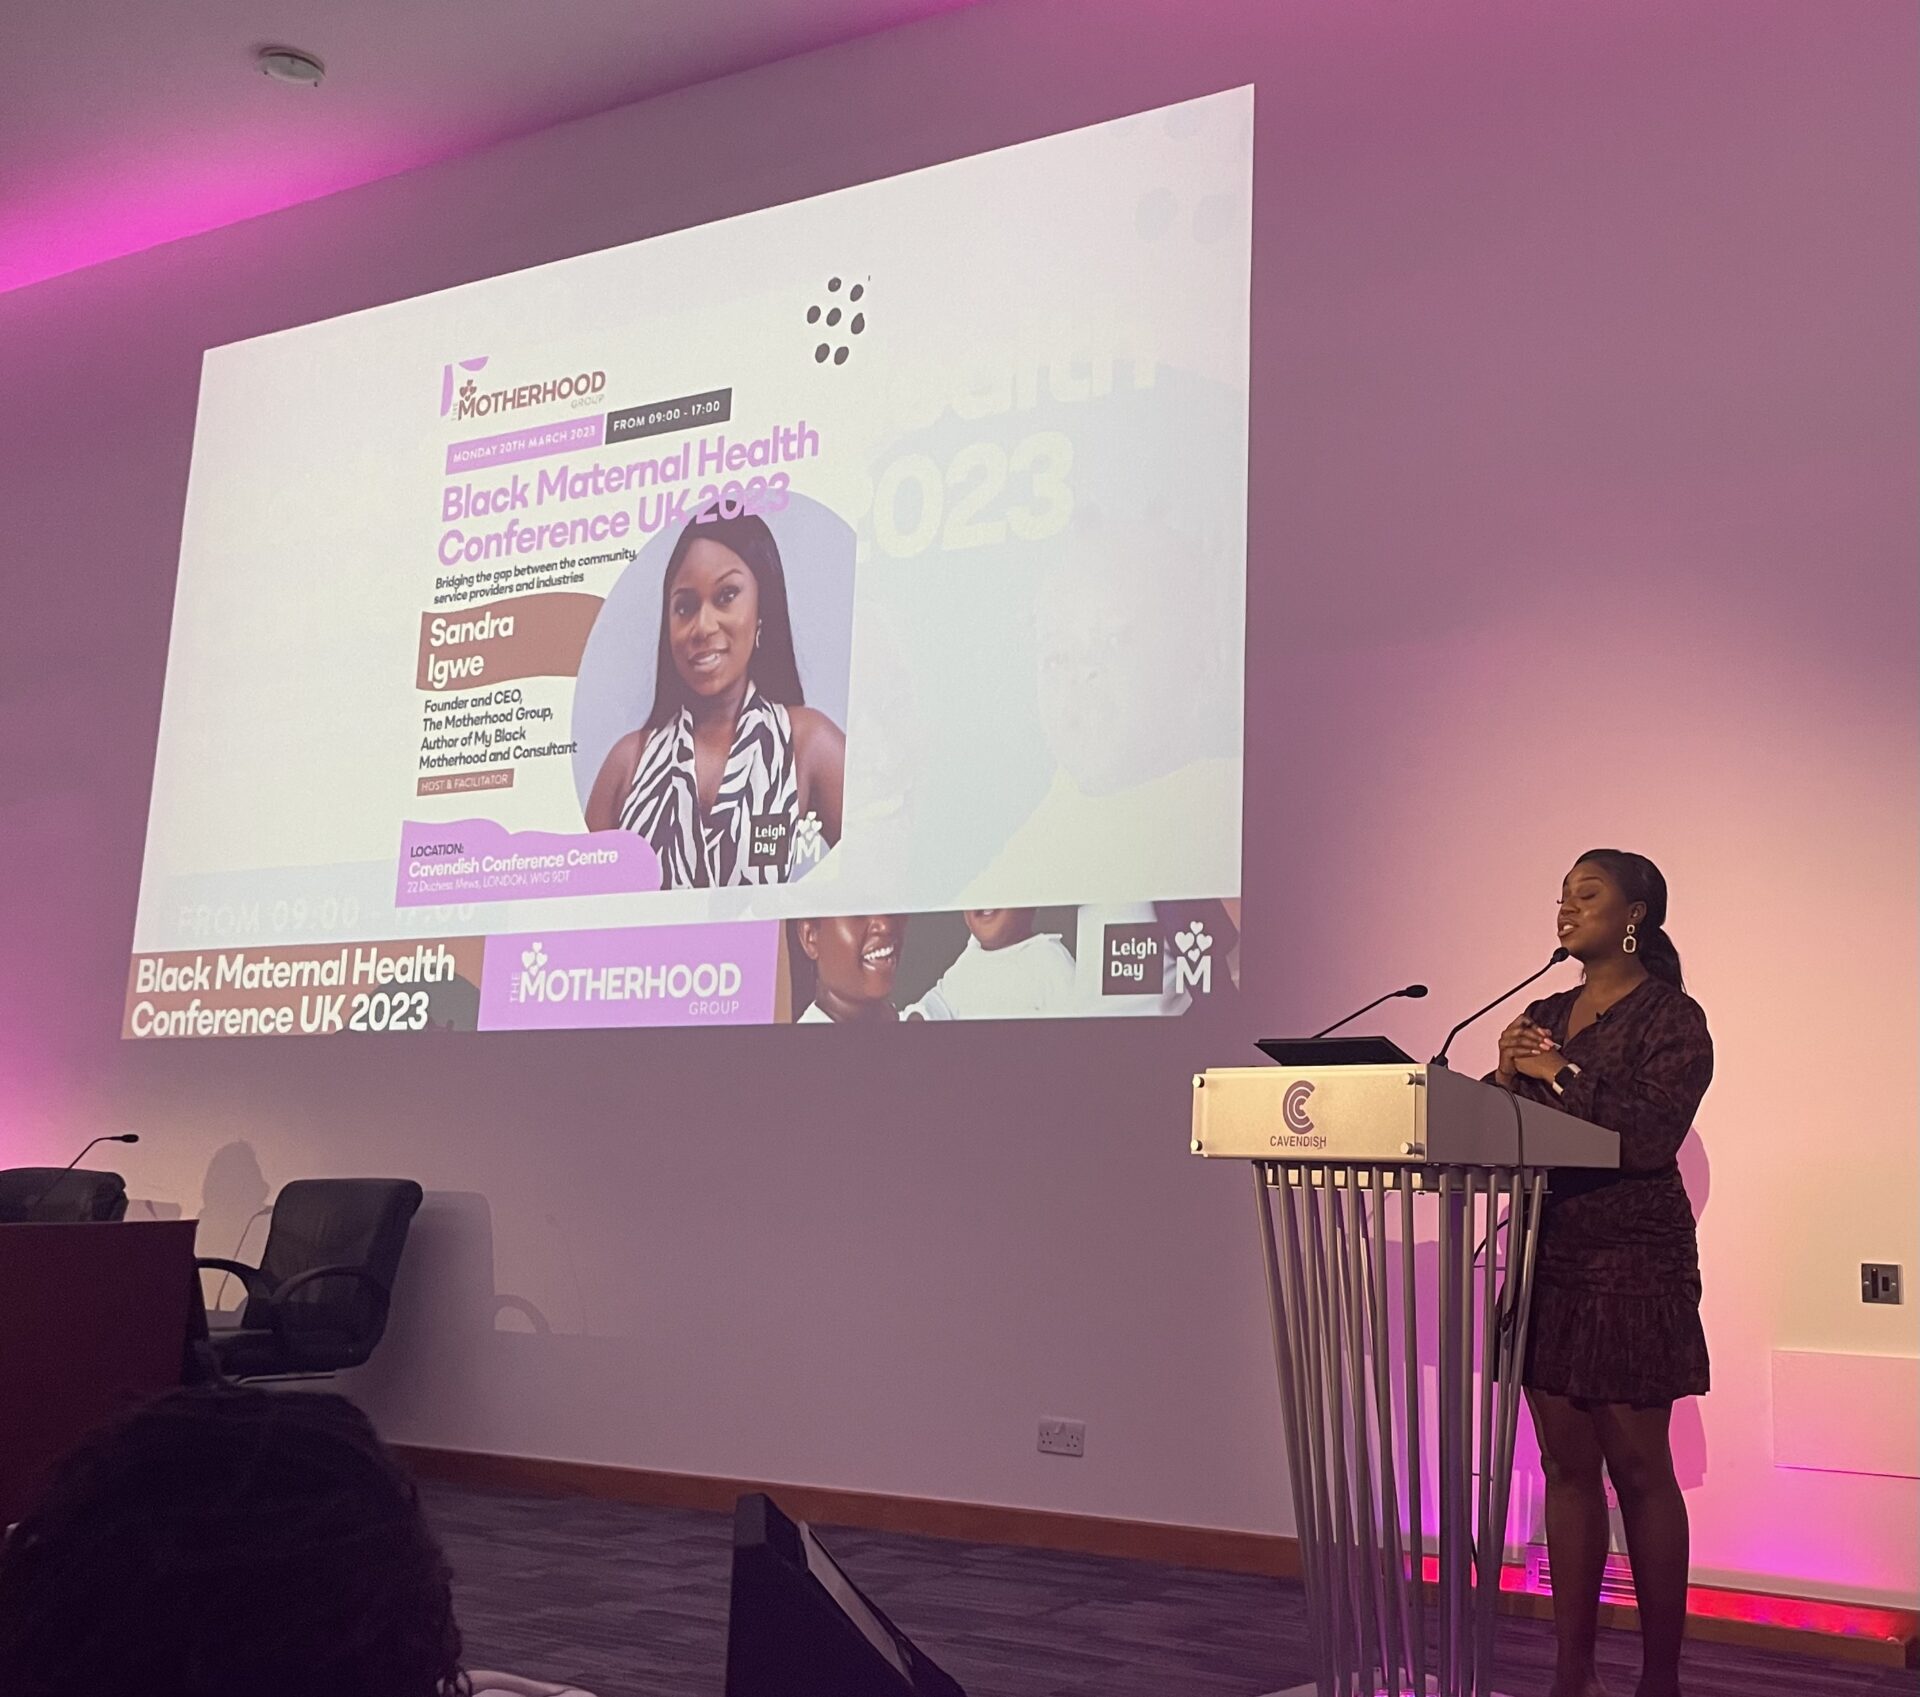 Motherhood group first Black Maternal Health Conference in the UK